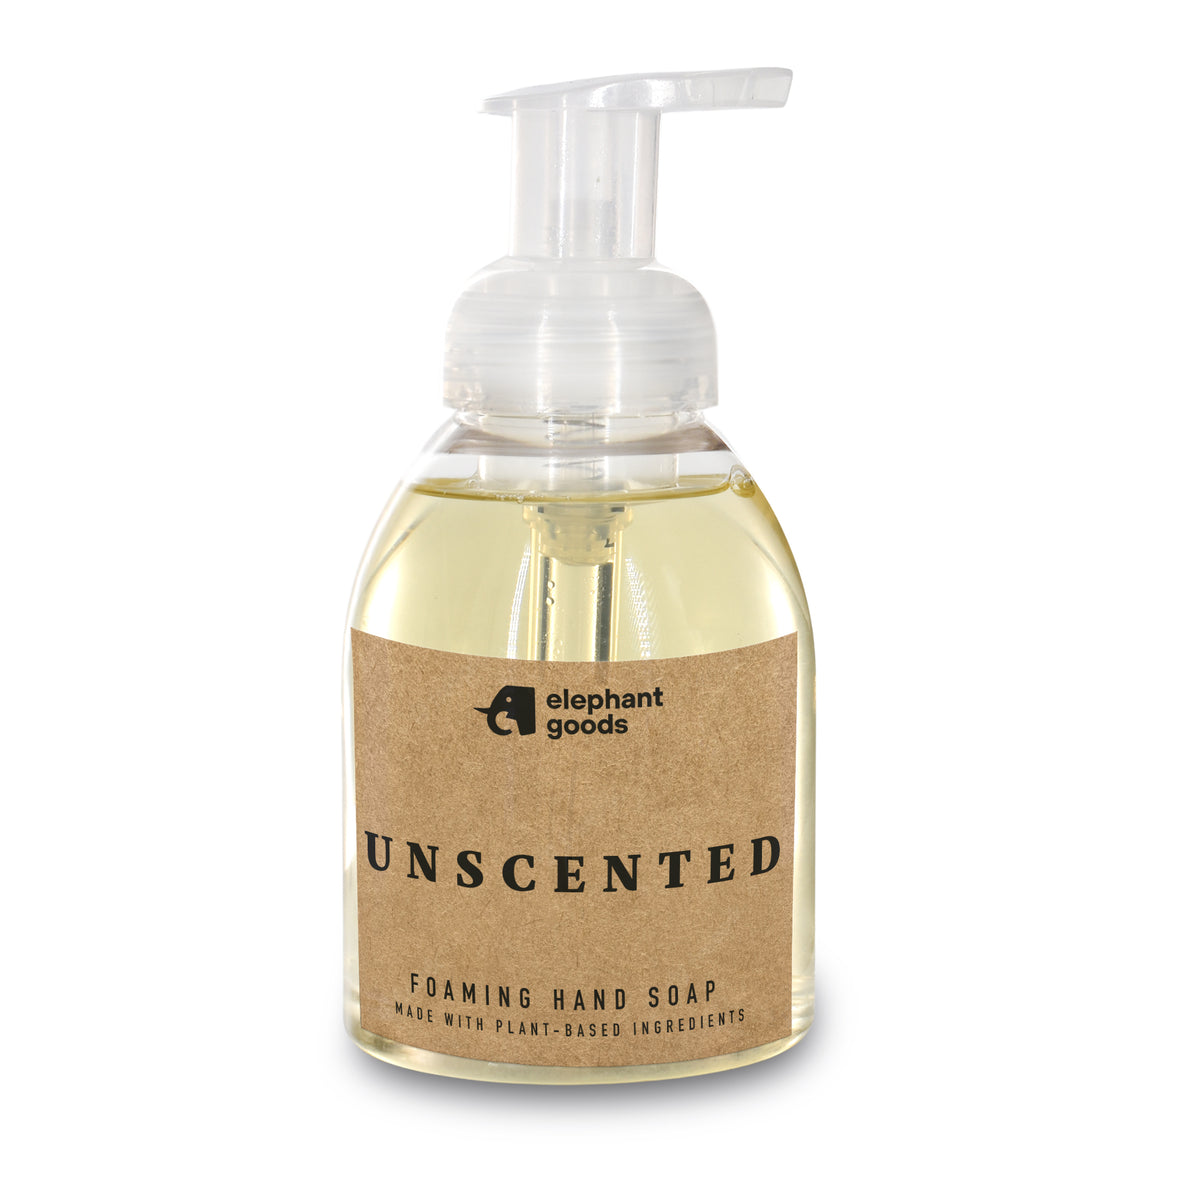 Unscented 10oz Foaming Hand Soap by Elephant Goods